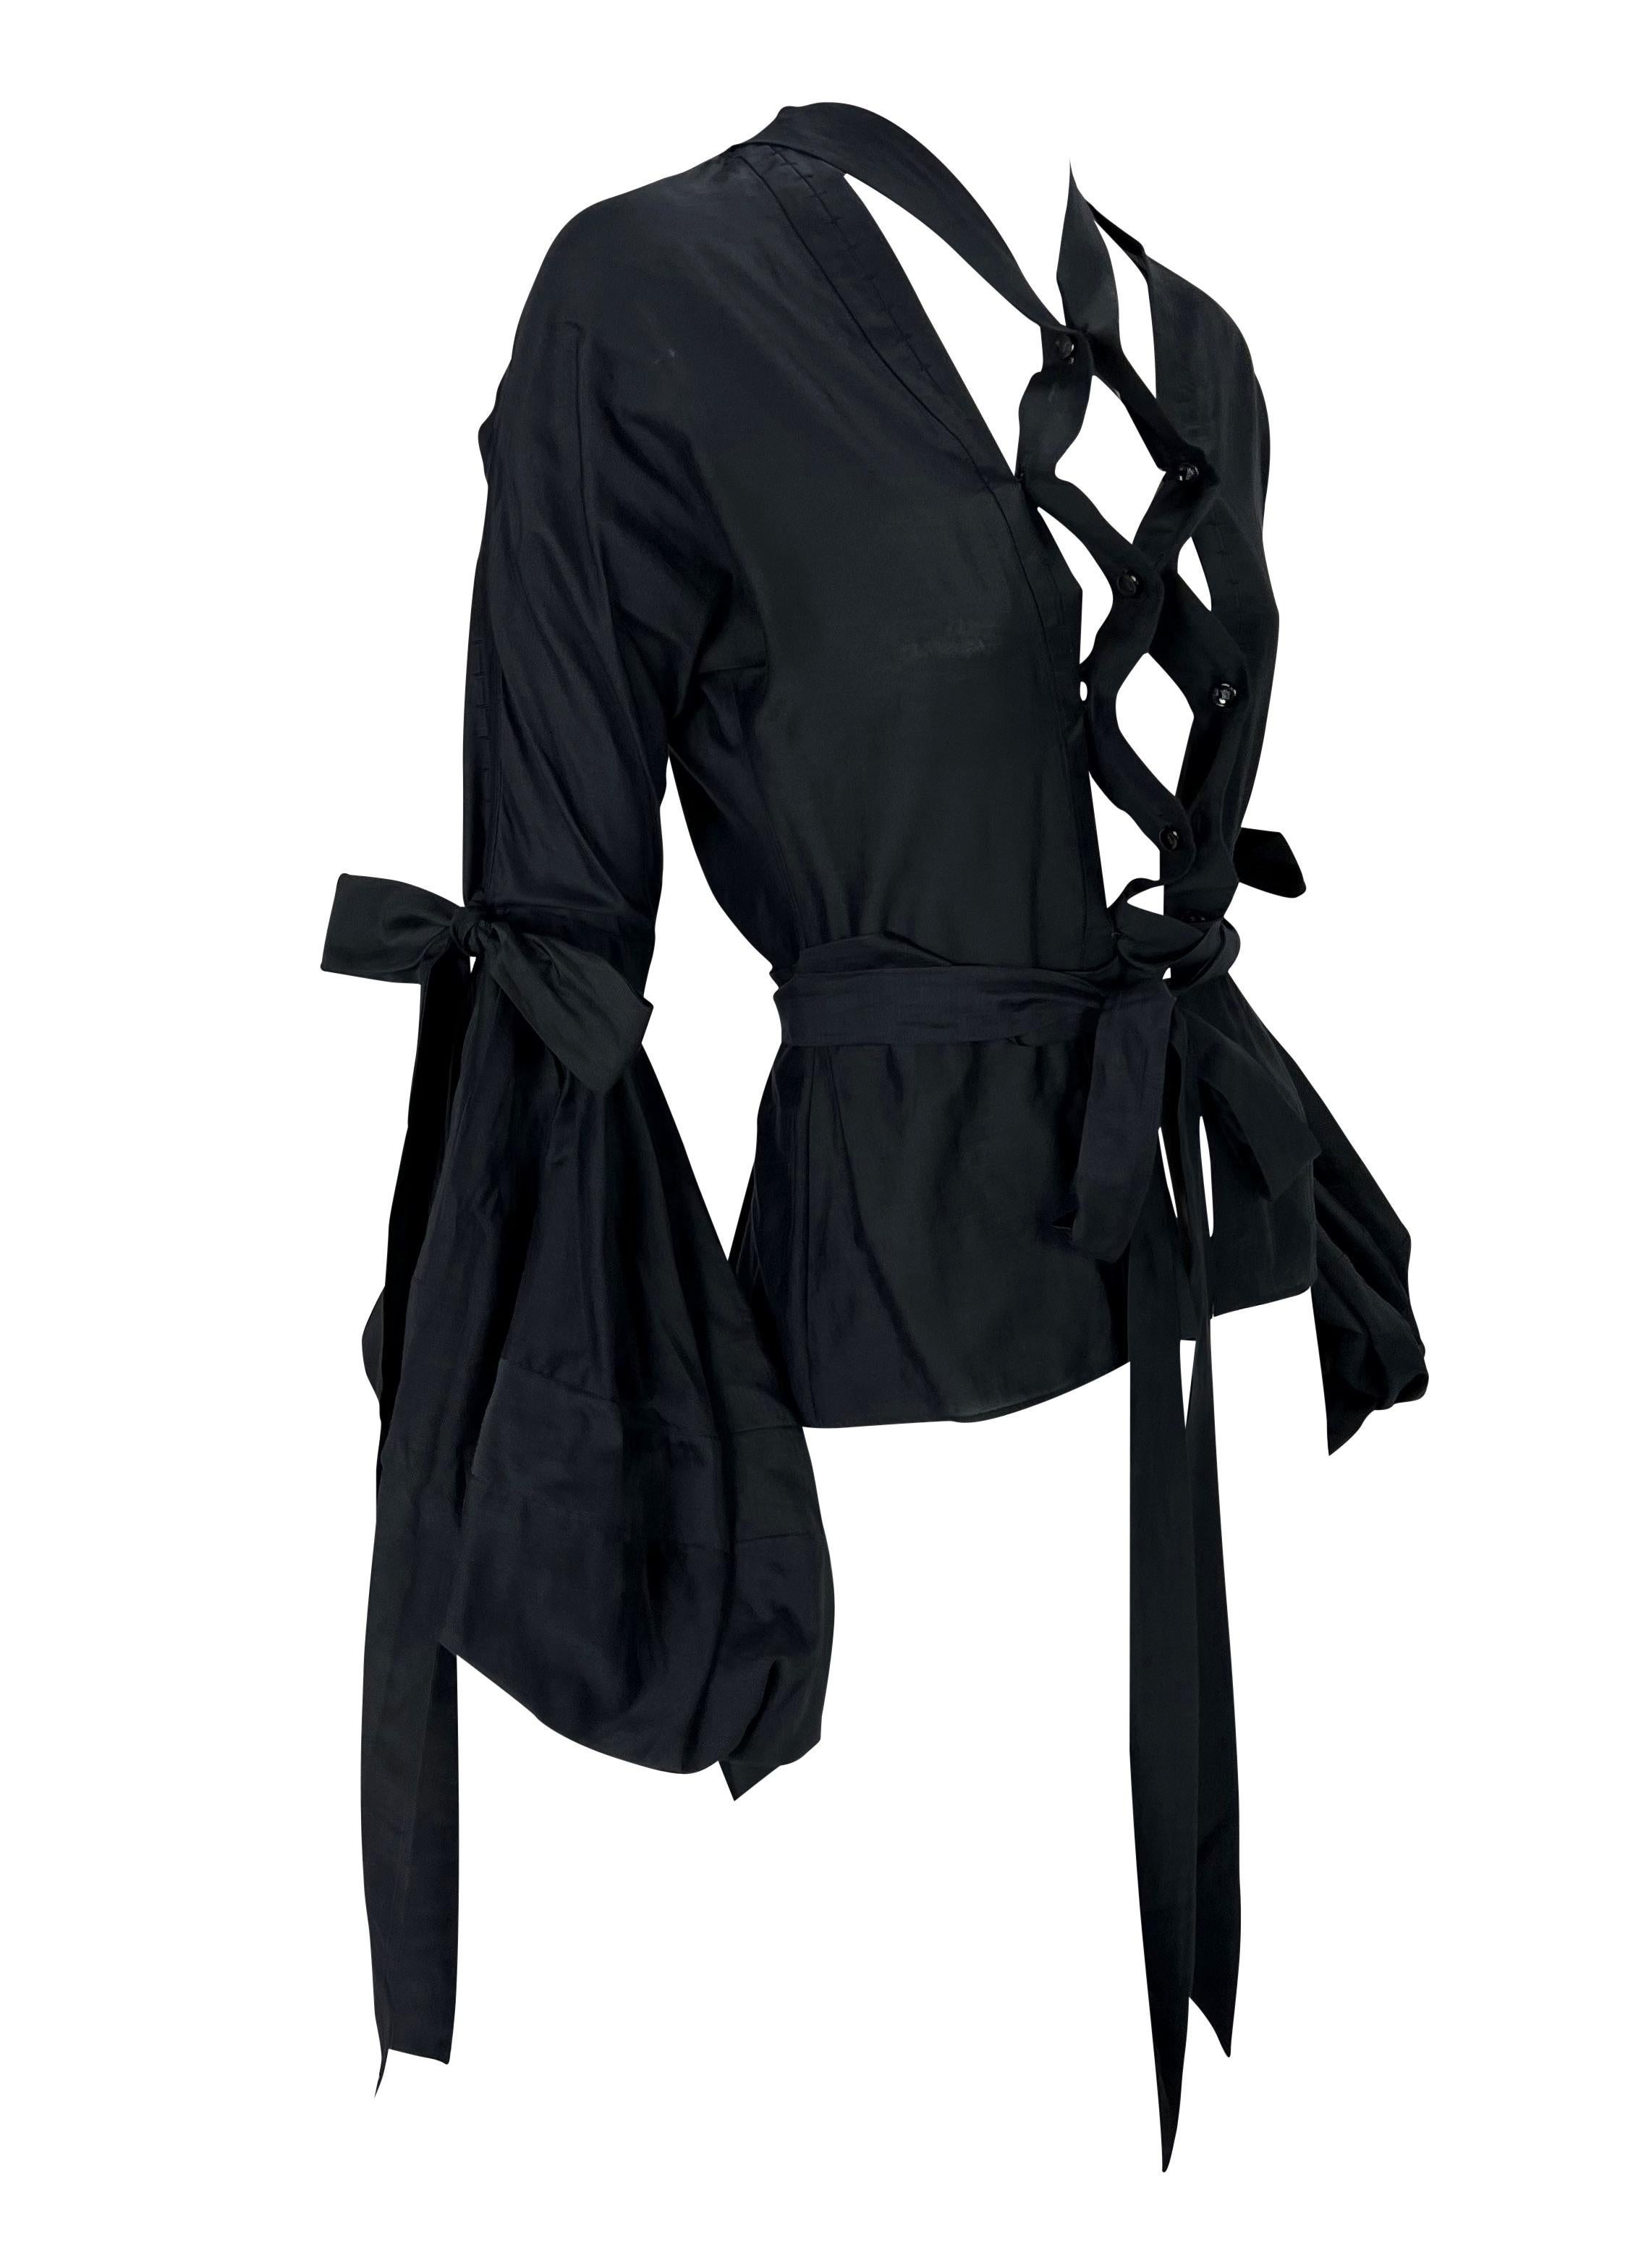 F/W 2002 Yves Saint Laurent by Tom Ford Ribbon Tie Balloon Sleeve Black Blouse For Sale 3